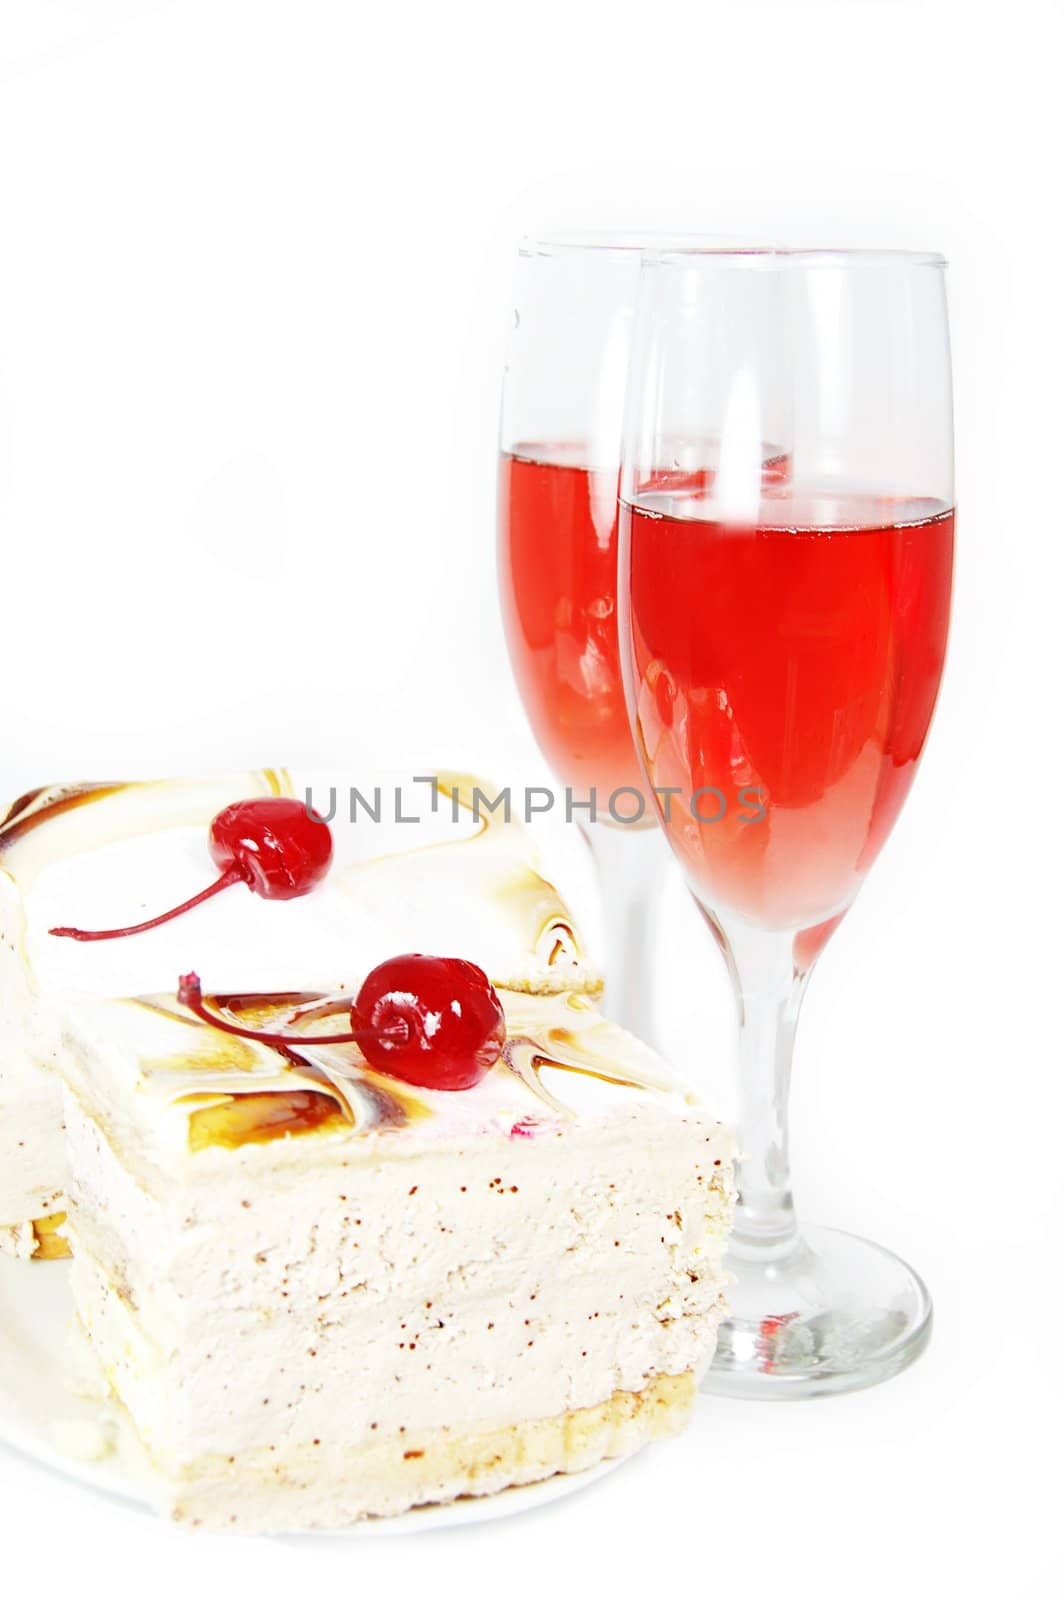 Red wine and cake with cherry in white